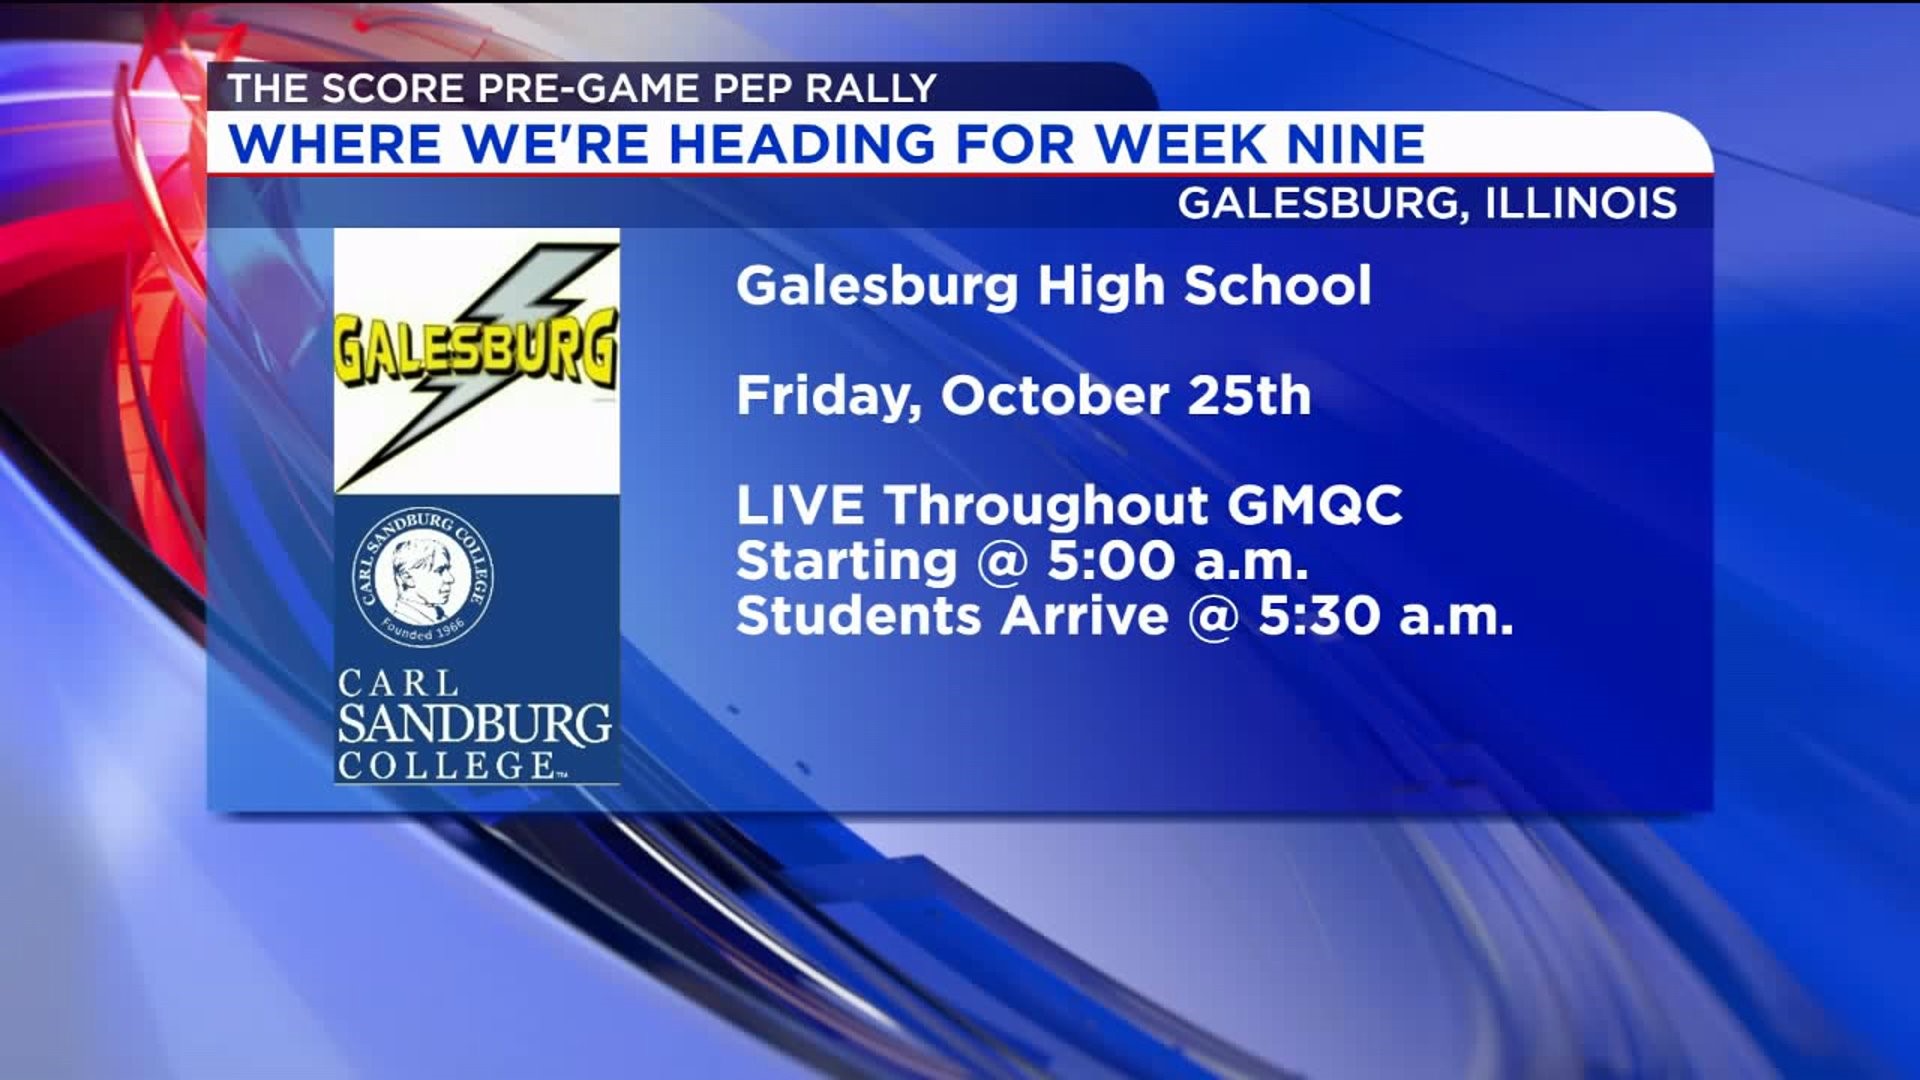 Week 9 of The Score Pre-Game Pep Rally takes us to Galesburg!